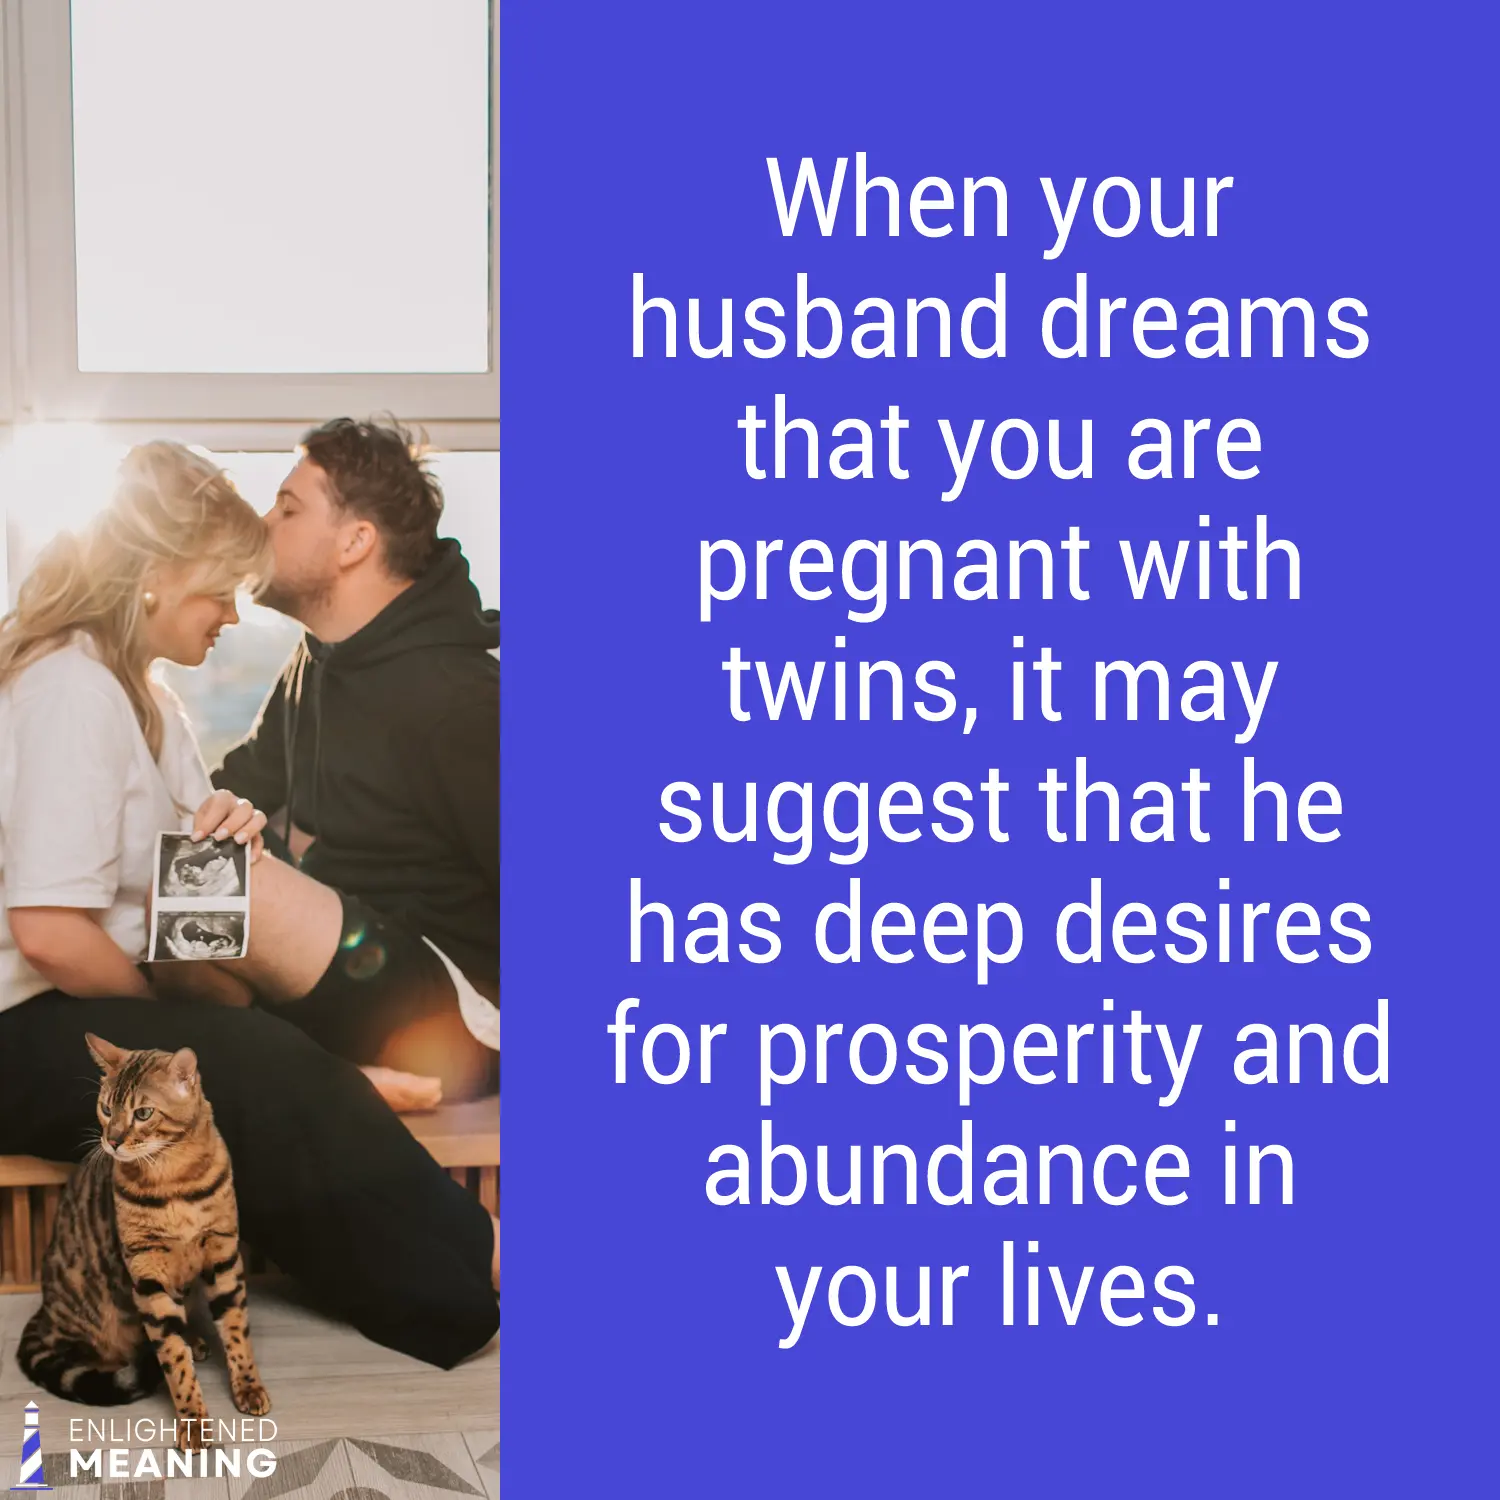 When your husband dreams that you are pregnant with twins